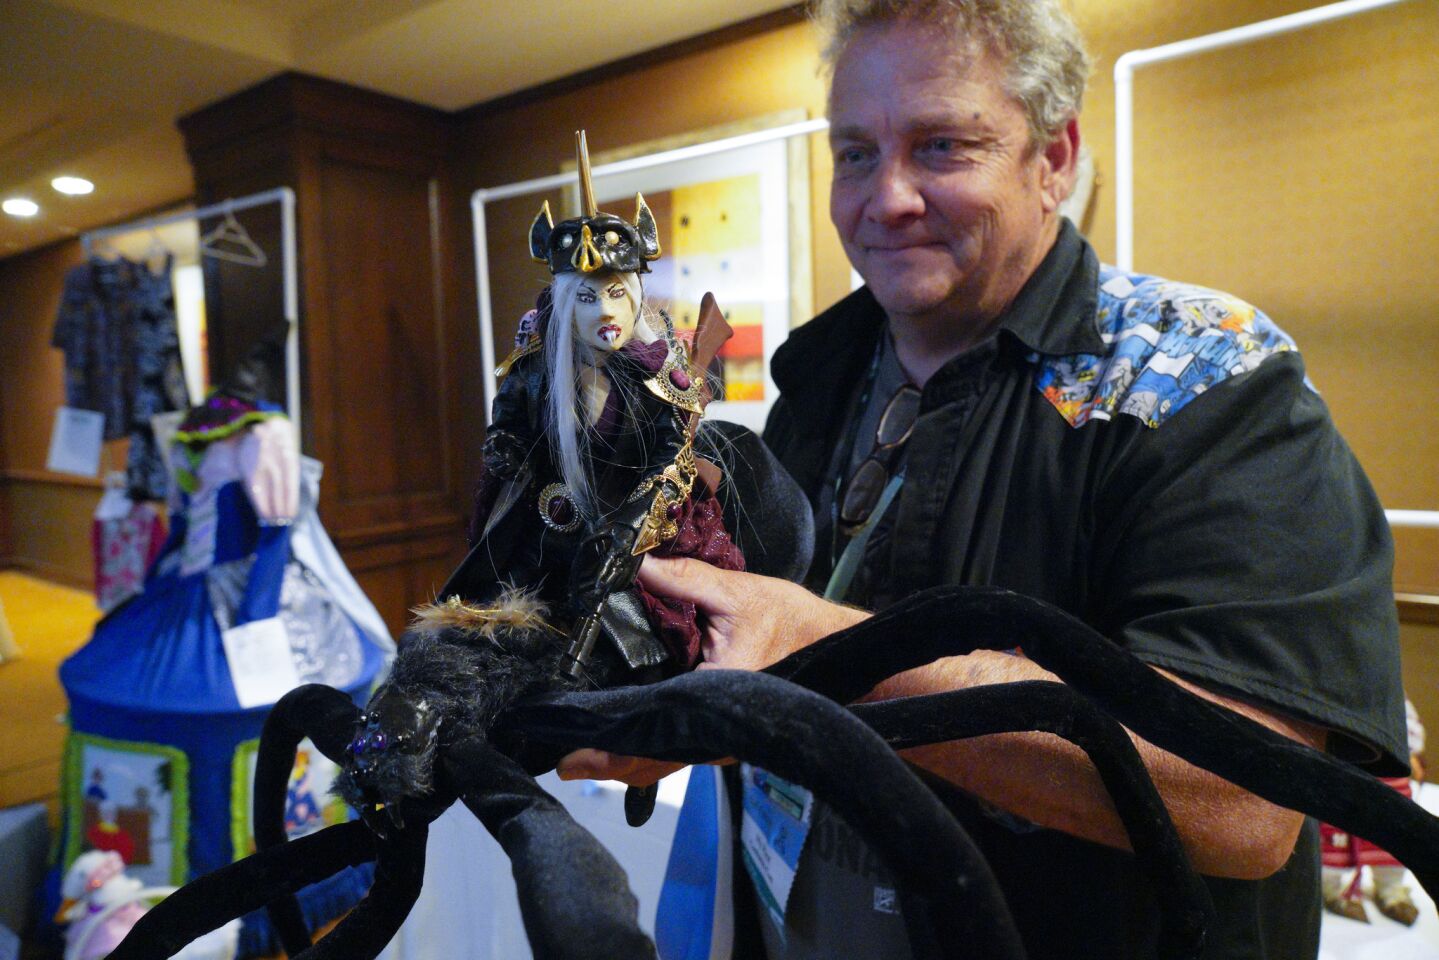 John Lucia shows off his winning creation at Costume-Con held in Mission Valley this past weekend.